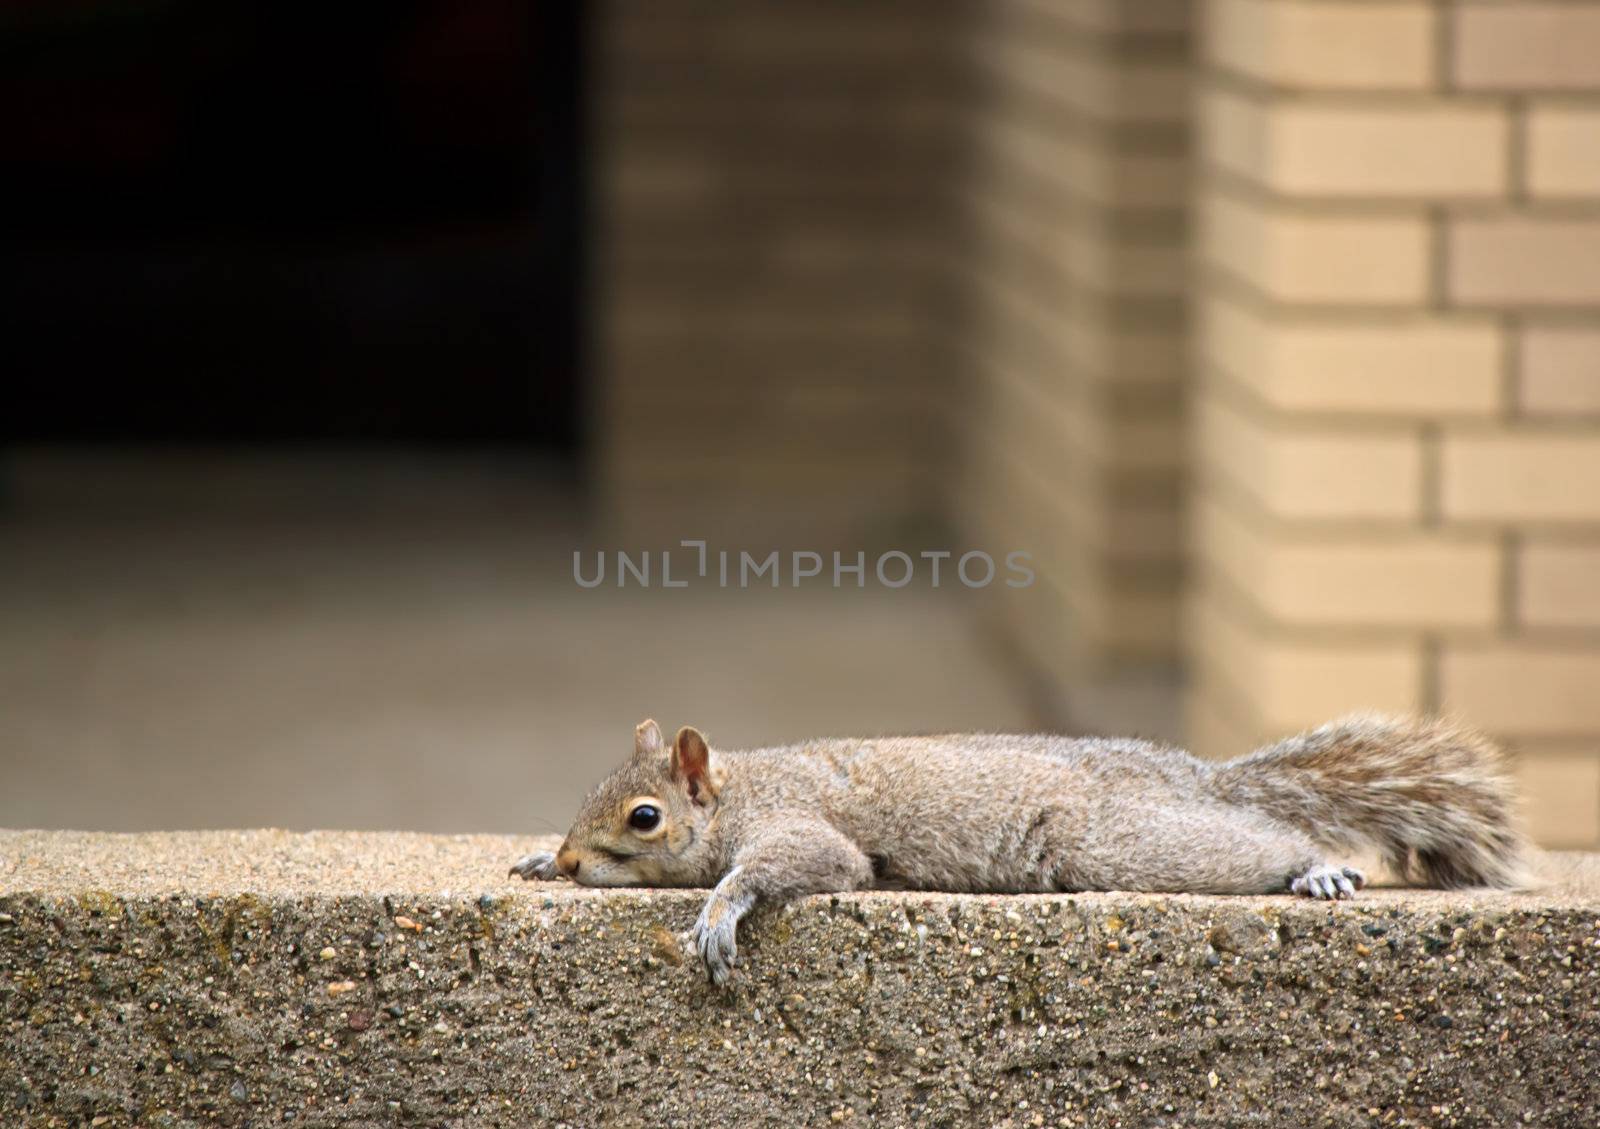 Adorable squirrel resting on brick wall